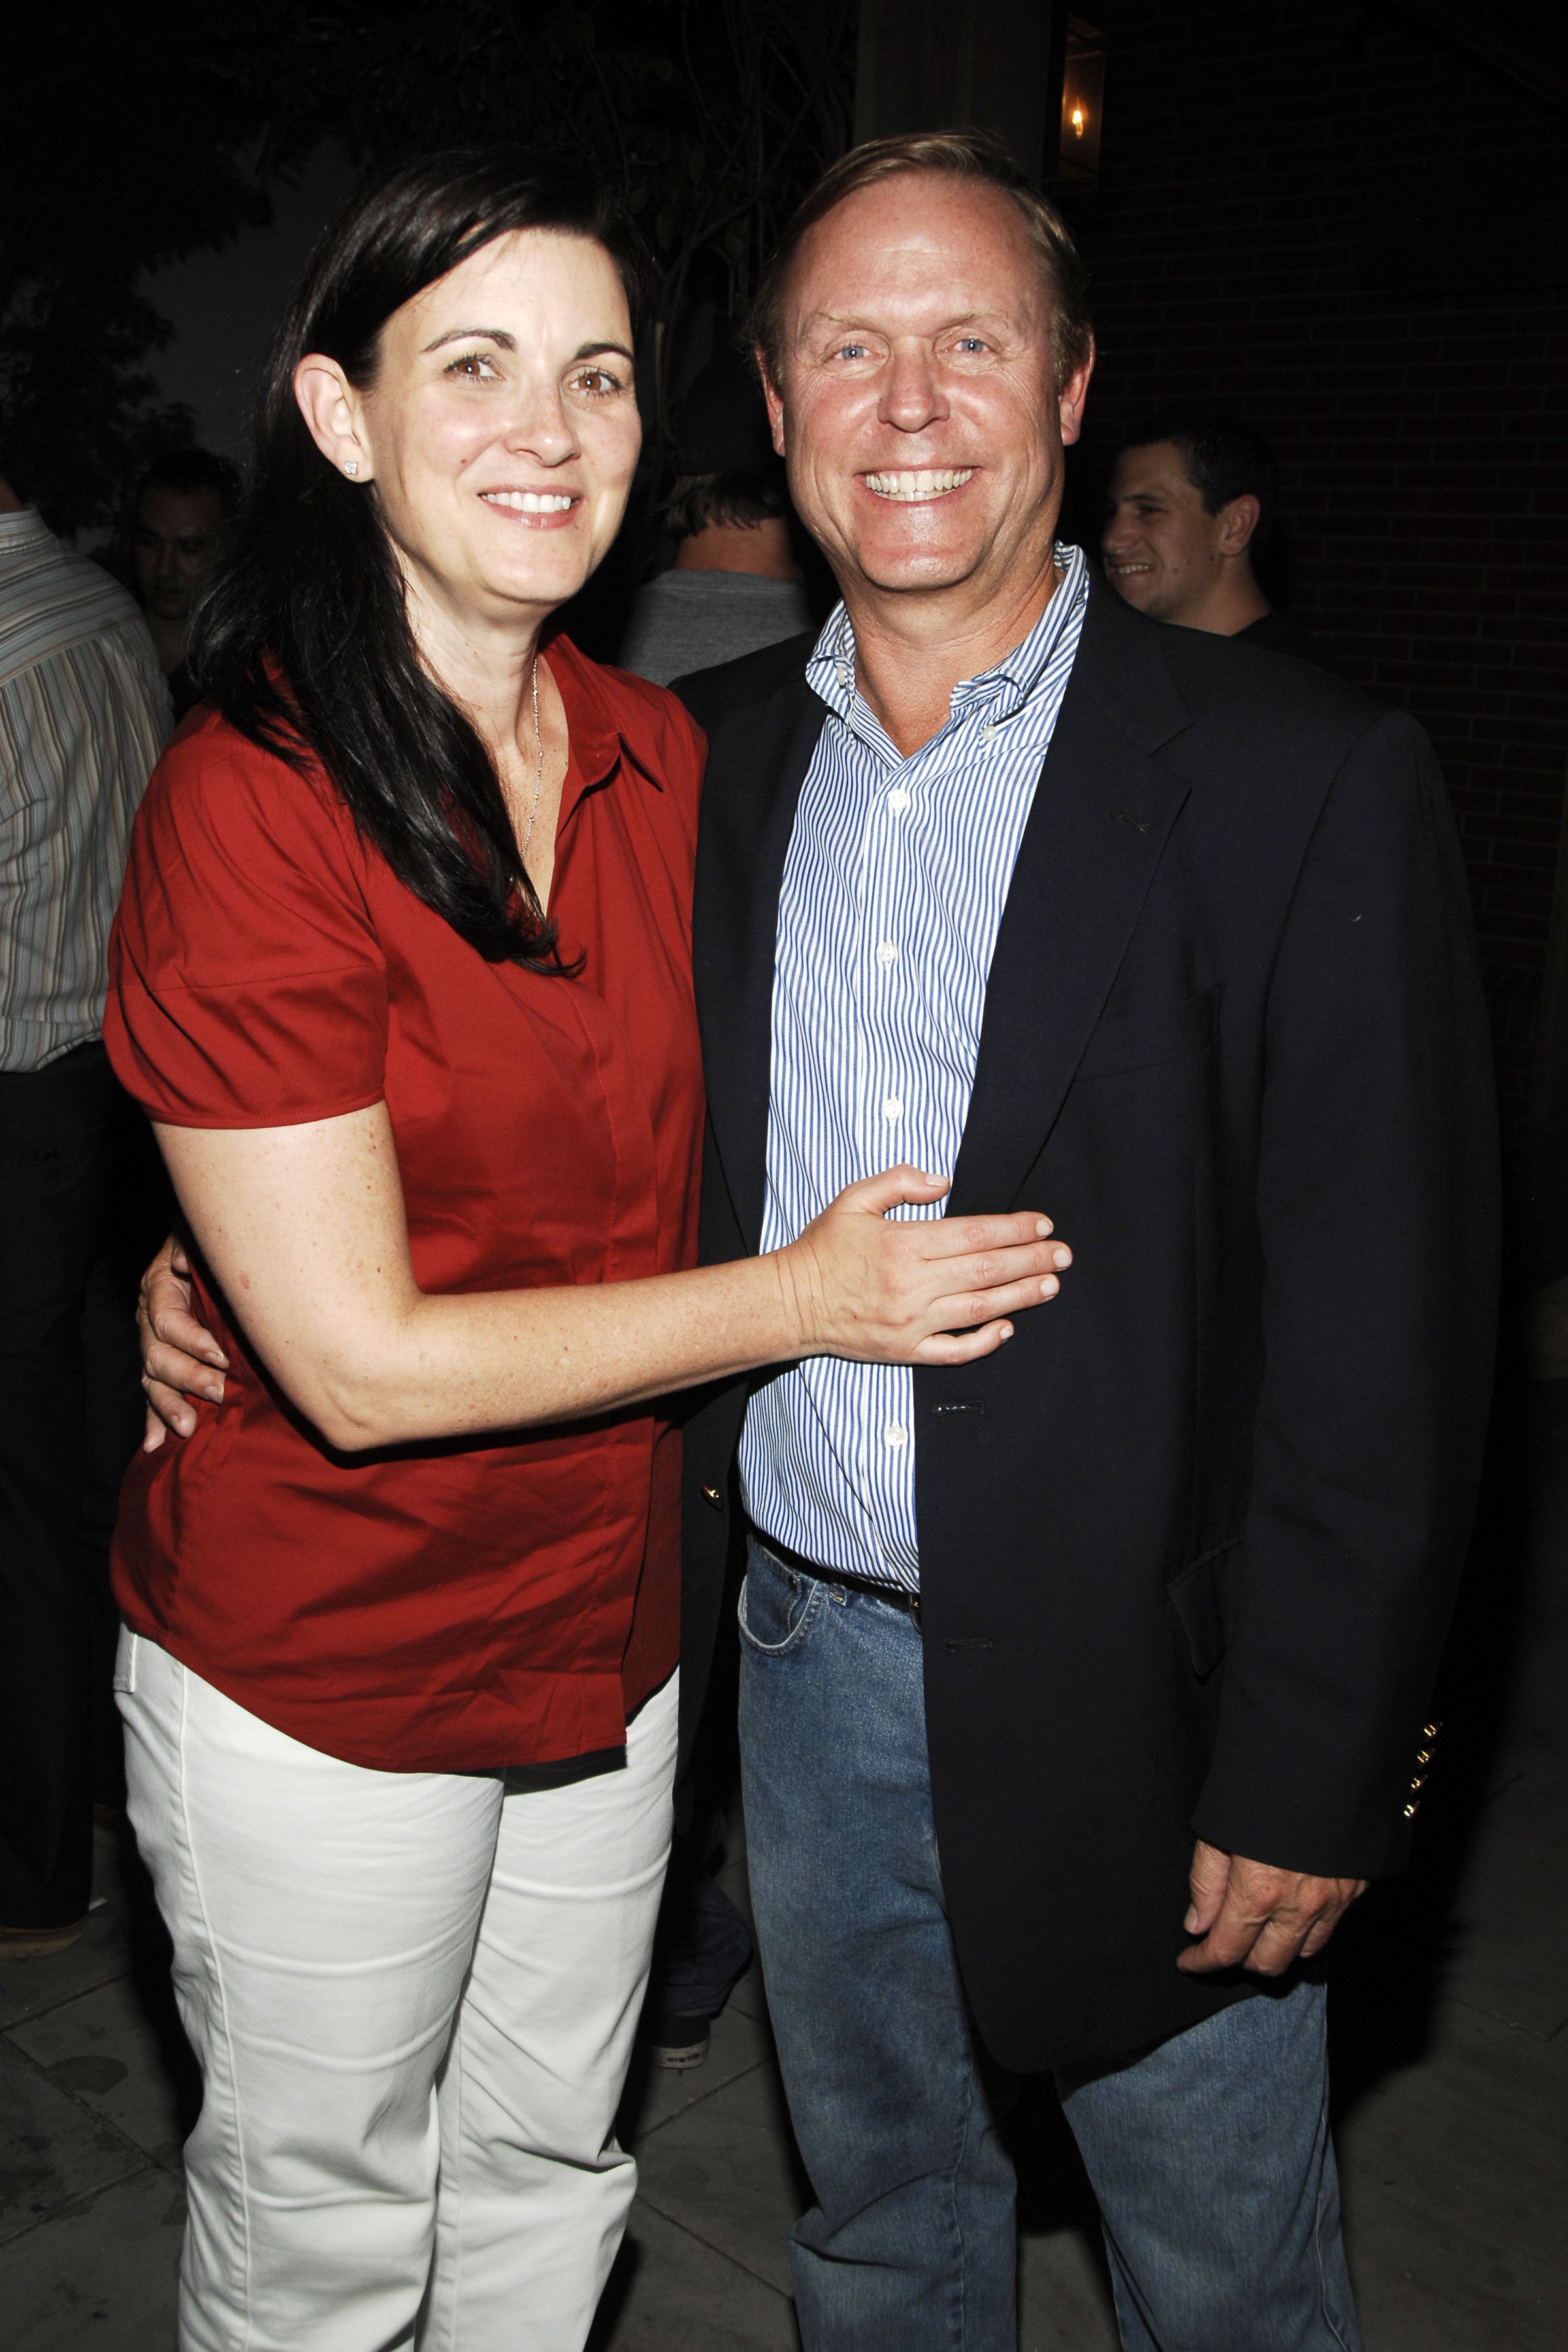 Kathleen Mara and Chris Mara attend the after party for "Transsiberian" at Soho Grand Hotel on July 8, 2008, in New York City. | Source: Getty Images